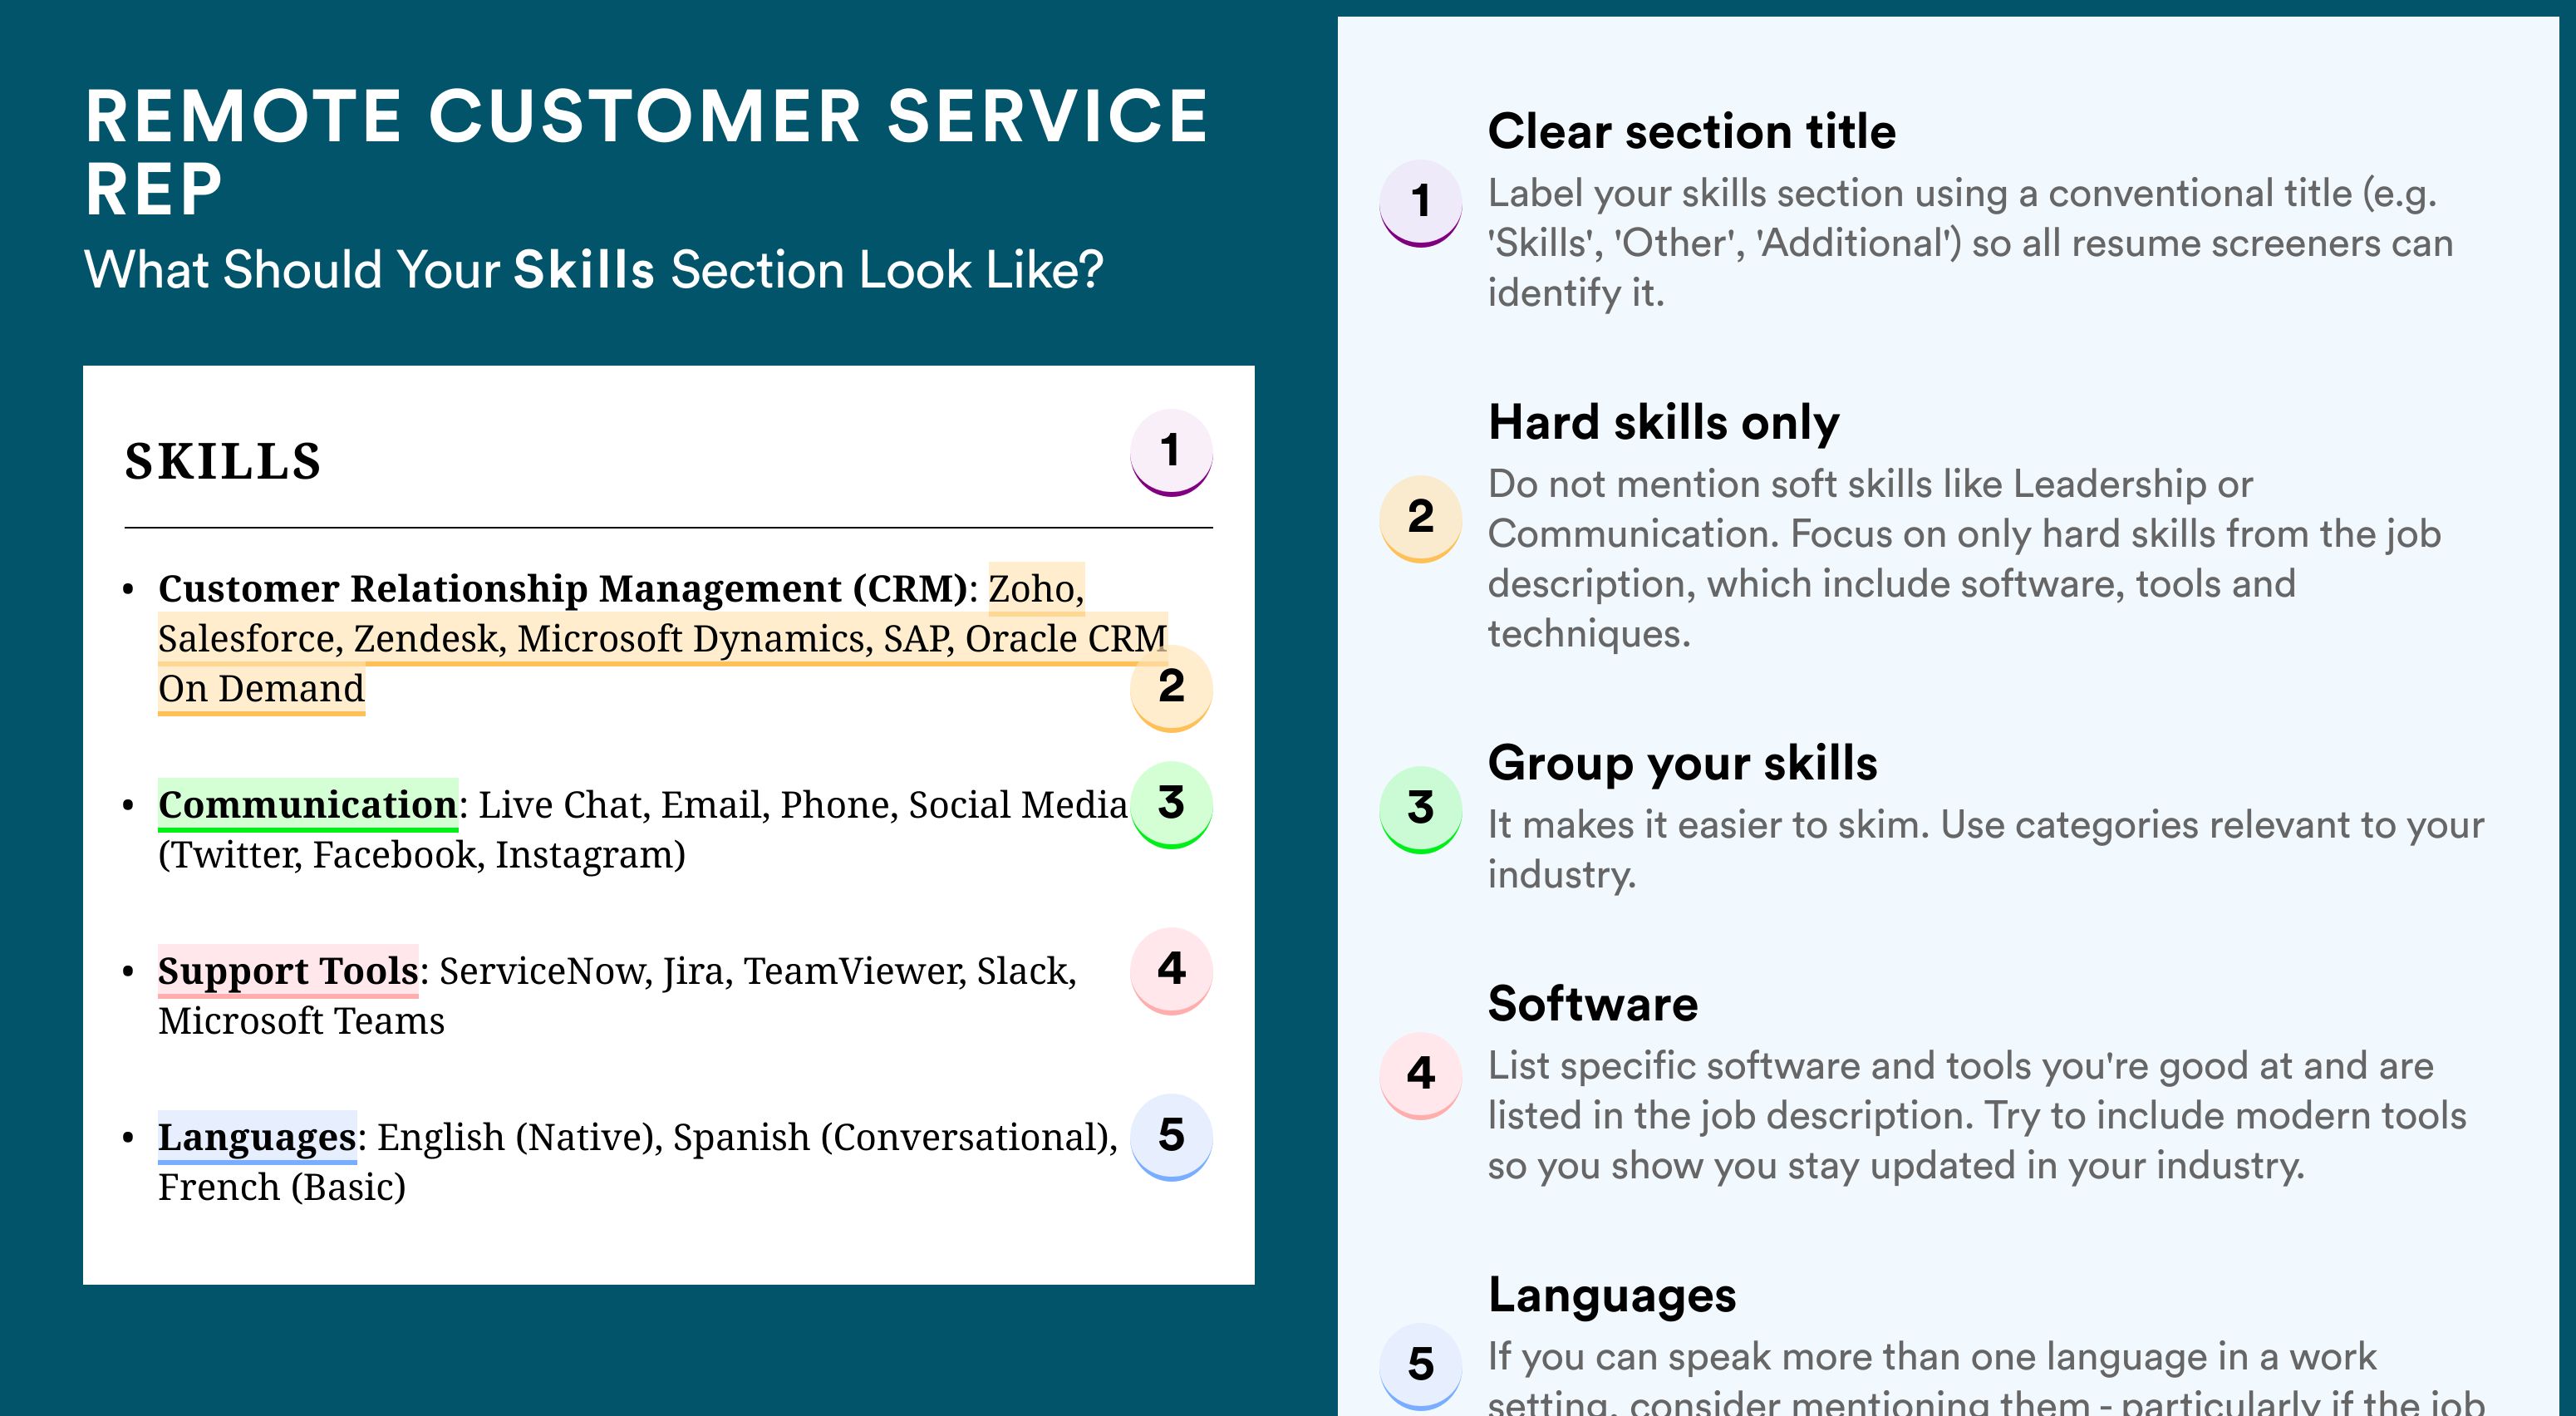 How To Write Your Skills Section - Remote Customer Service Rep Roles